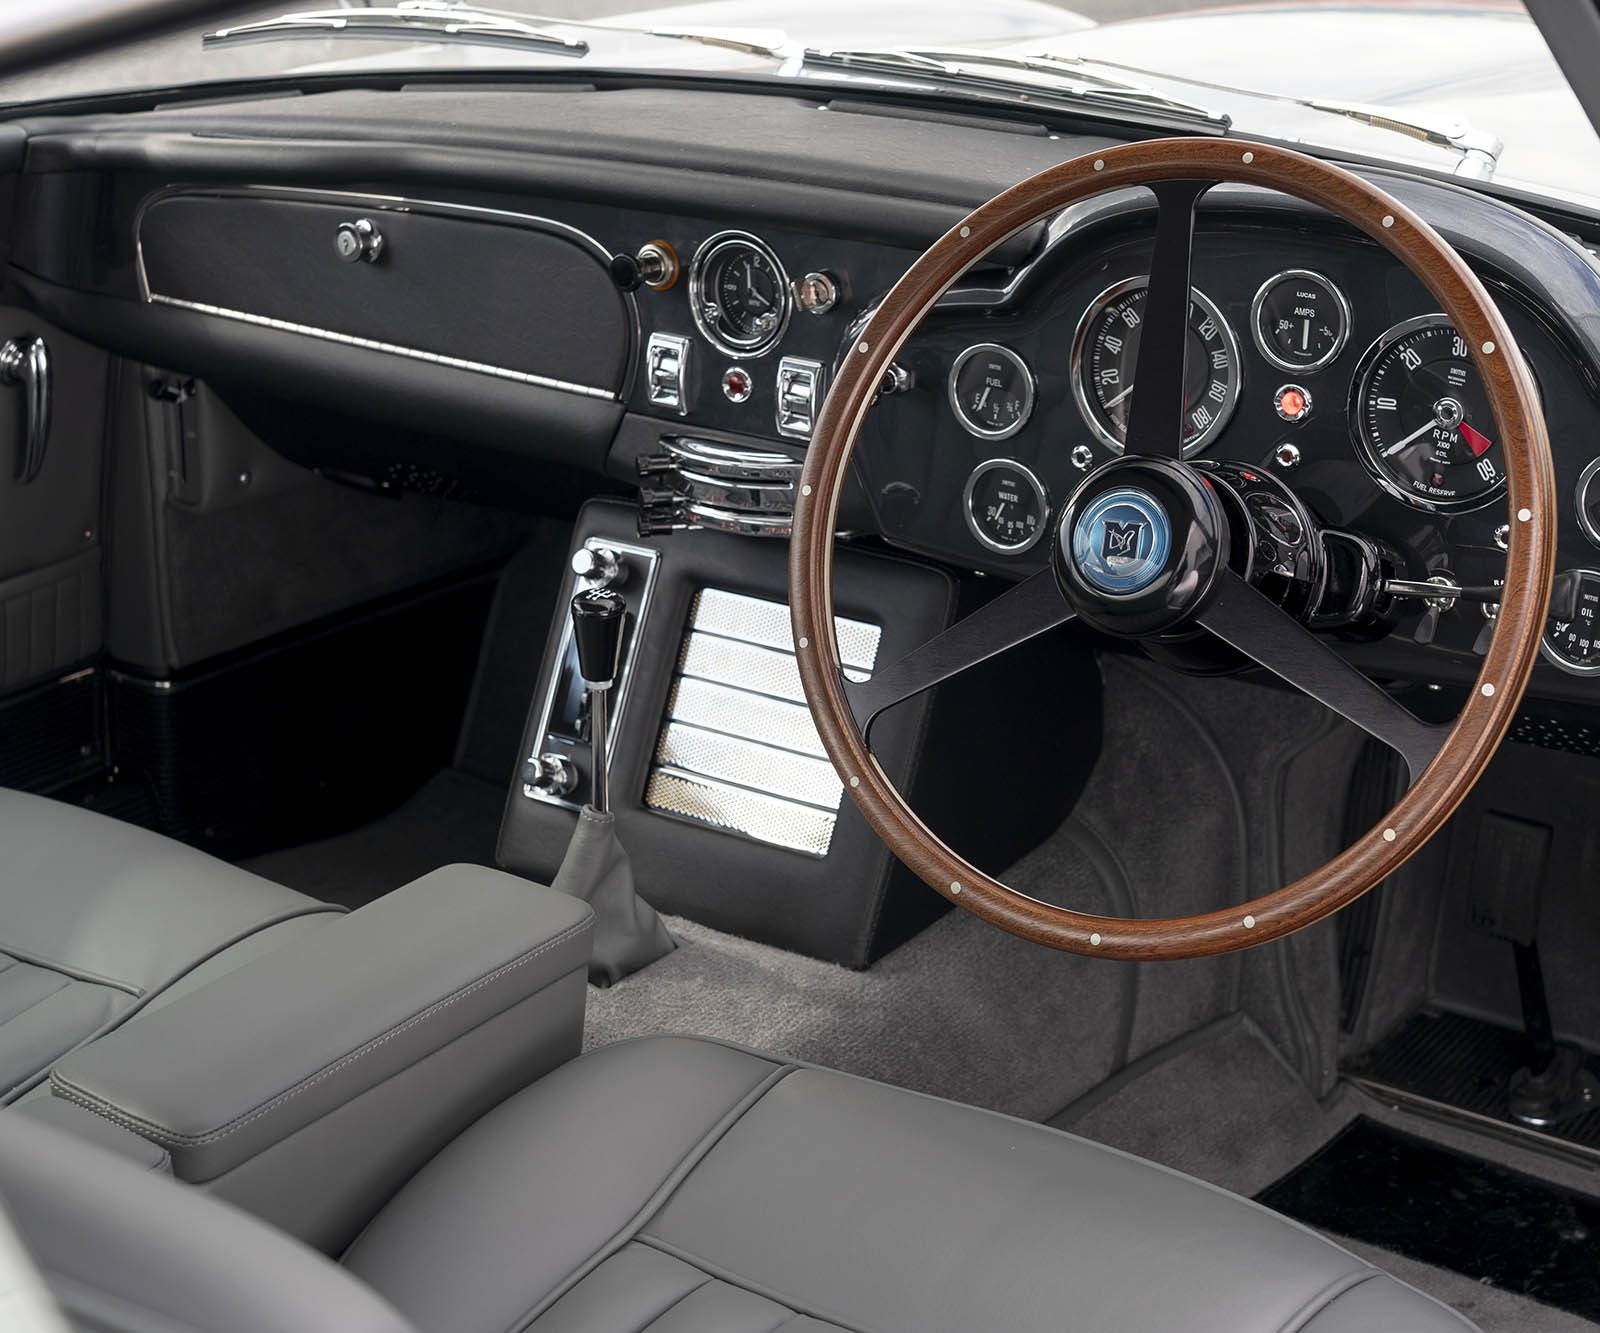 interior of a classic car with grey leather